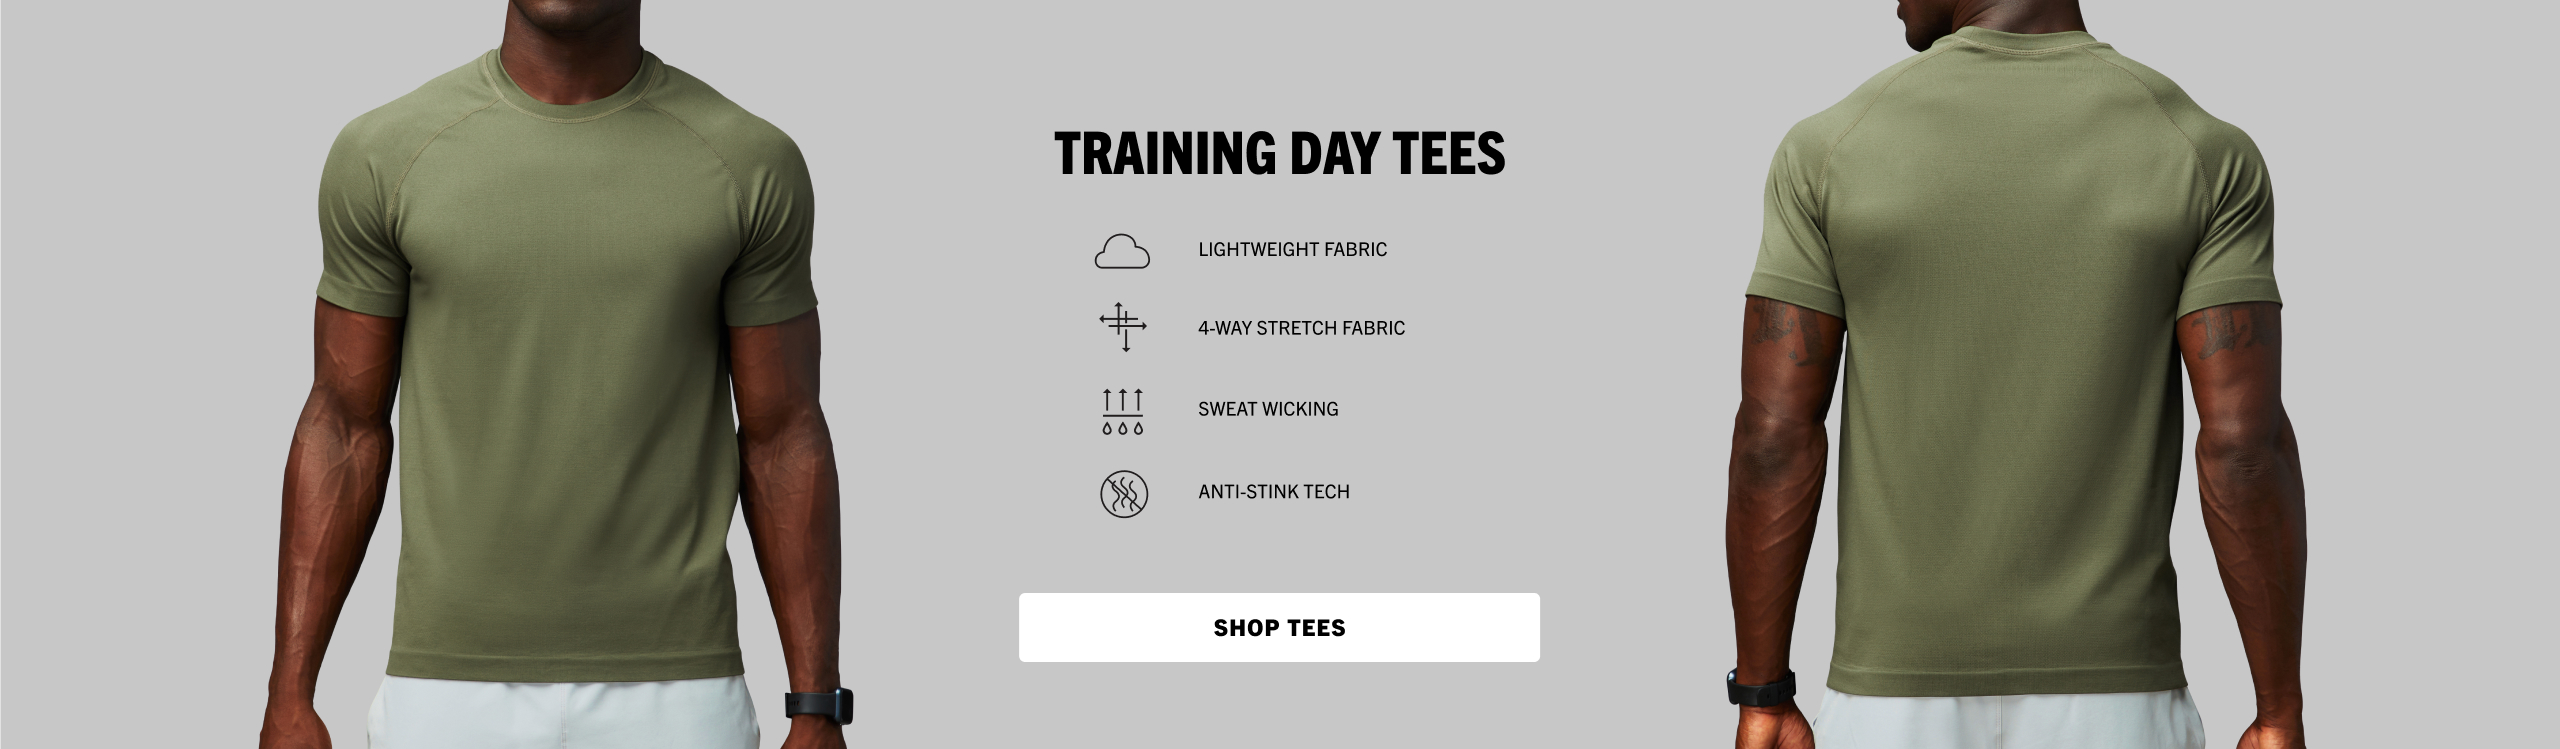 Click to shop our training day tees. Featuring lightweight fabric, 4-way stretch, sweat wicking and anti-stink tech.